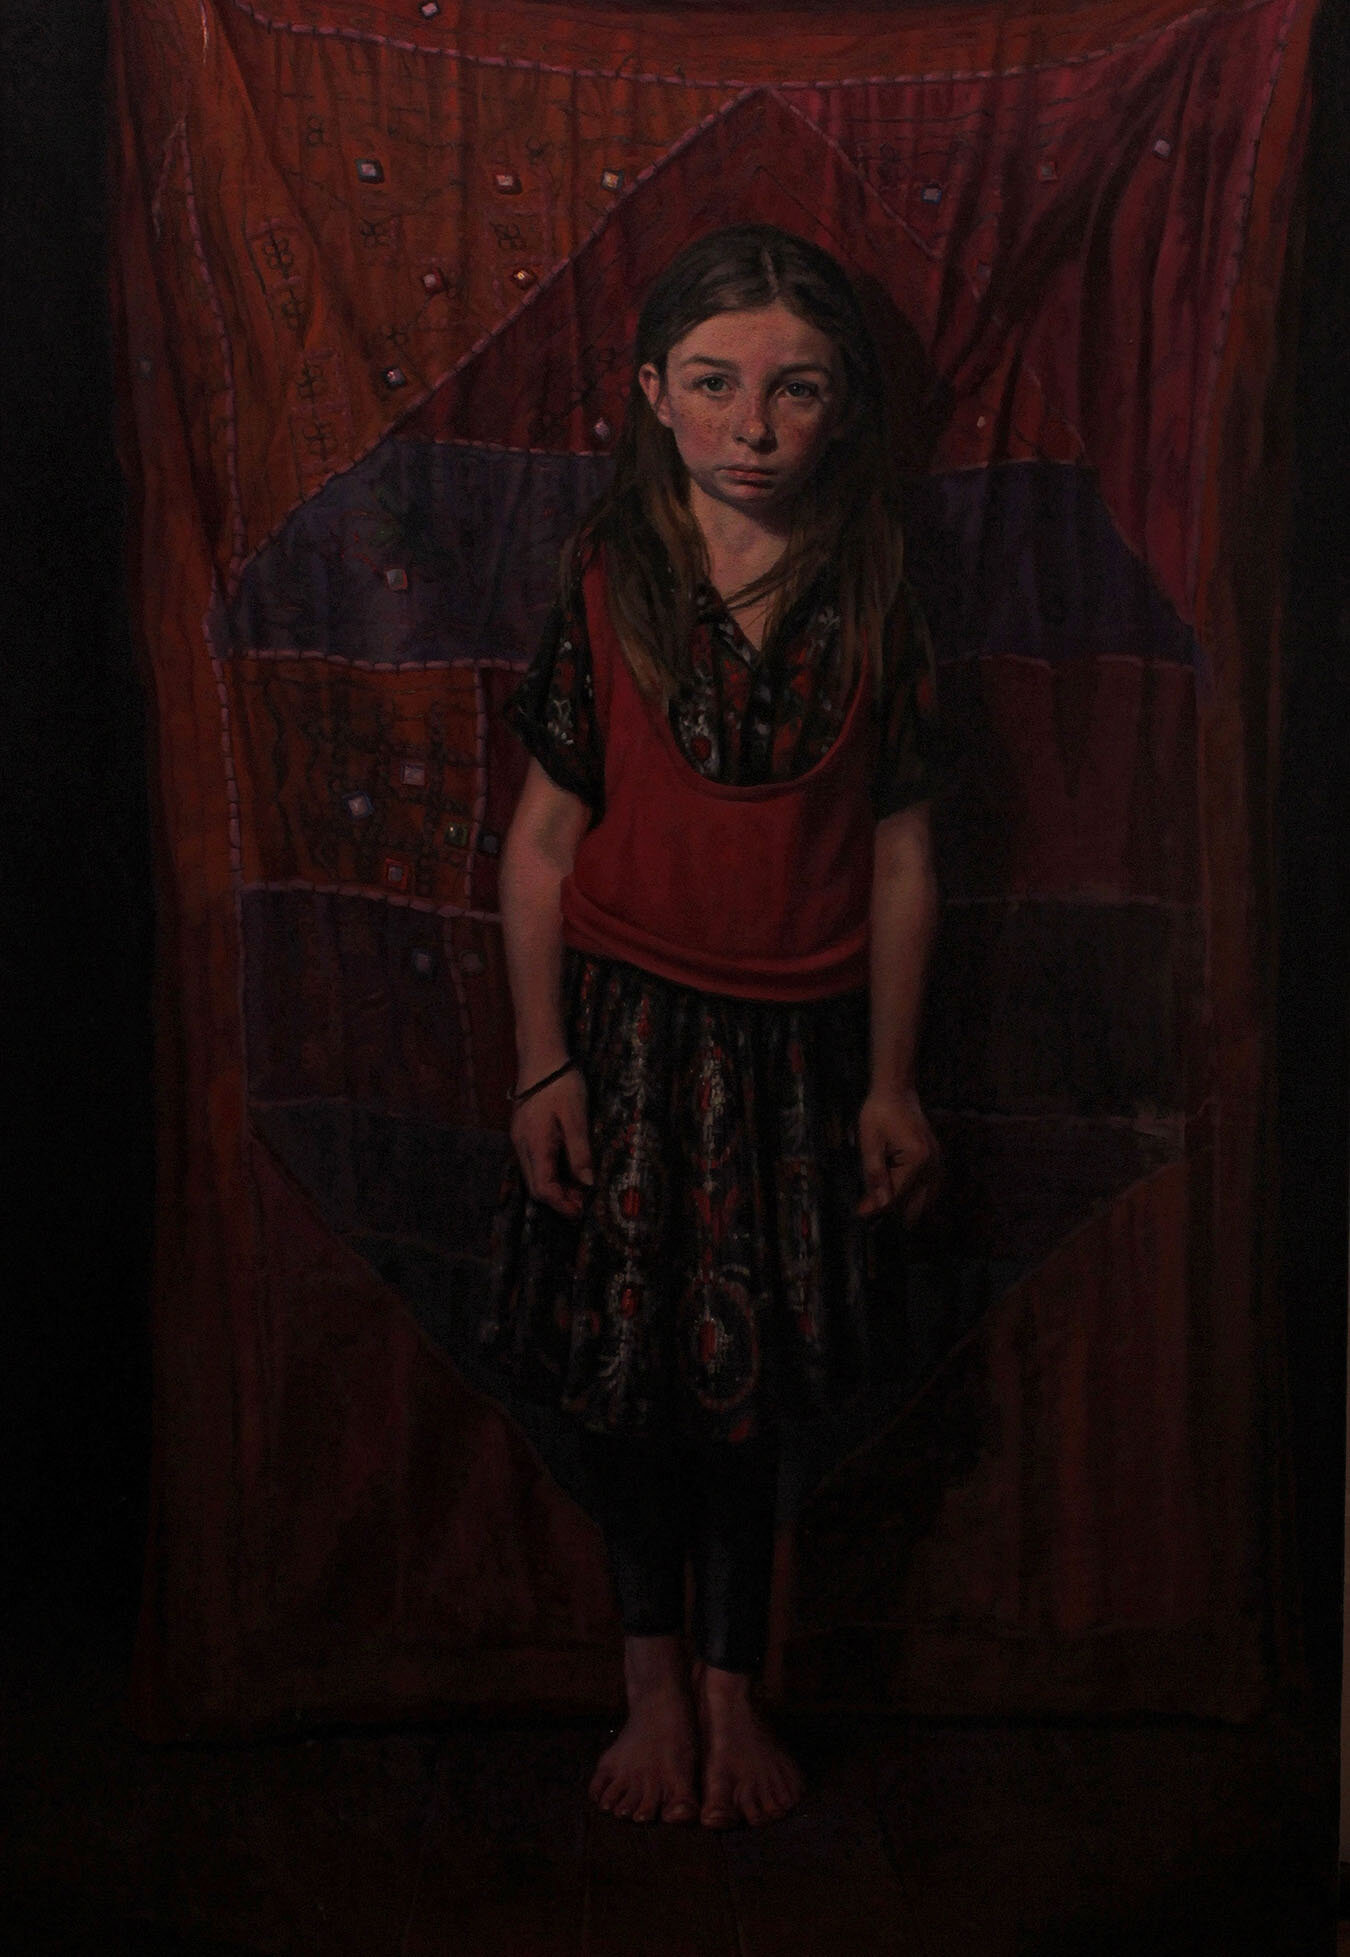 IMG_1297-Stage-fright- The girl standing in front of the red fabric is an oil on canvas 60 X 40 inches 50%.jpg